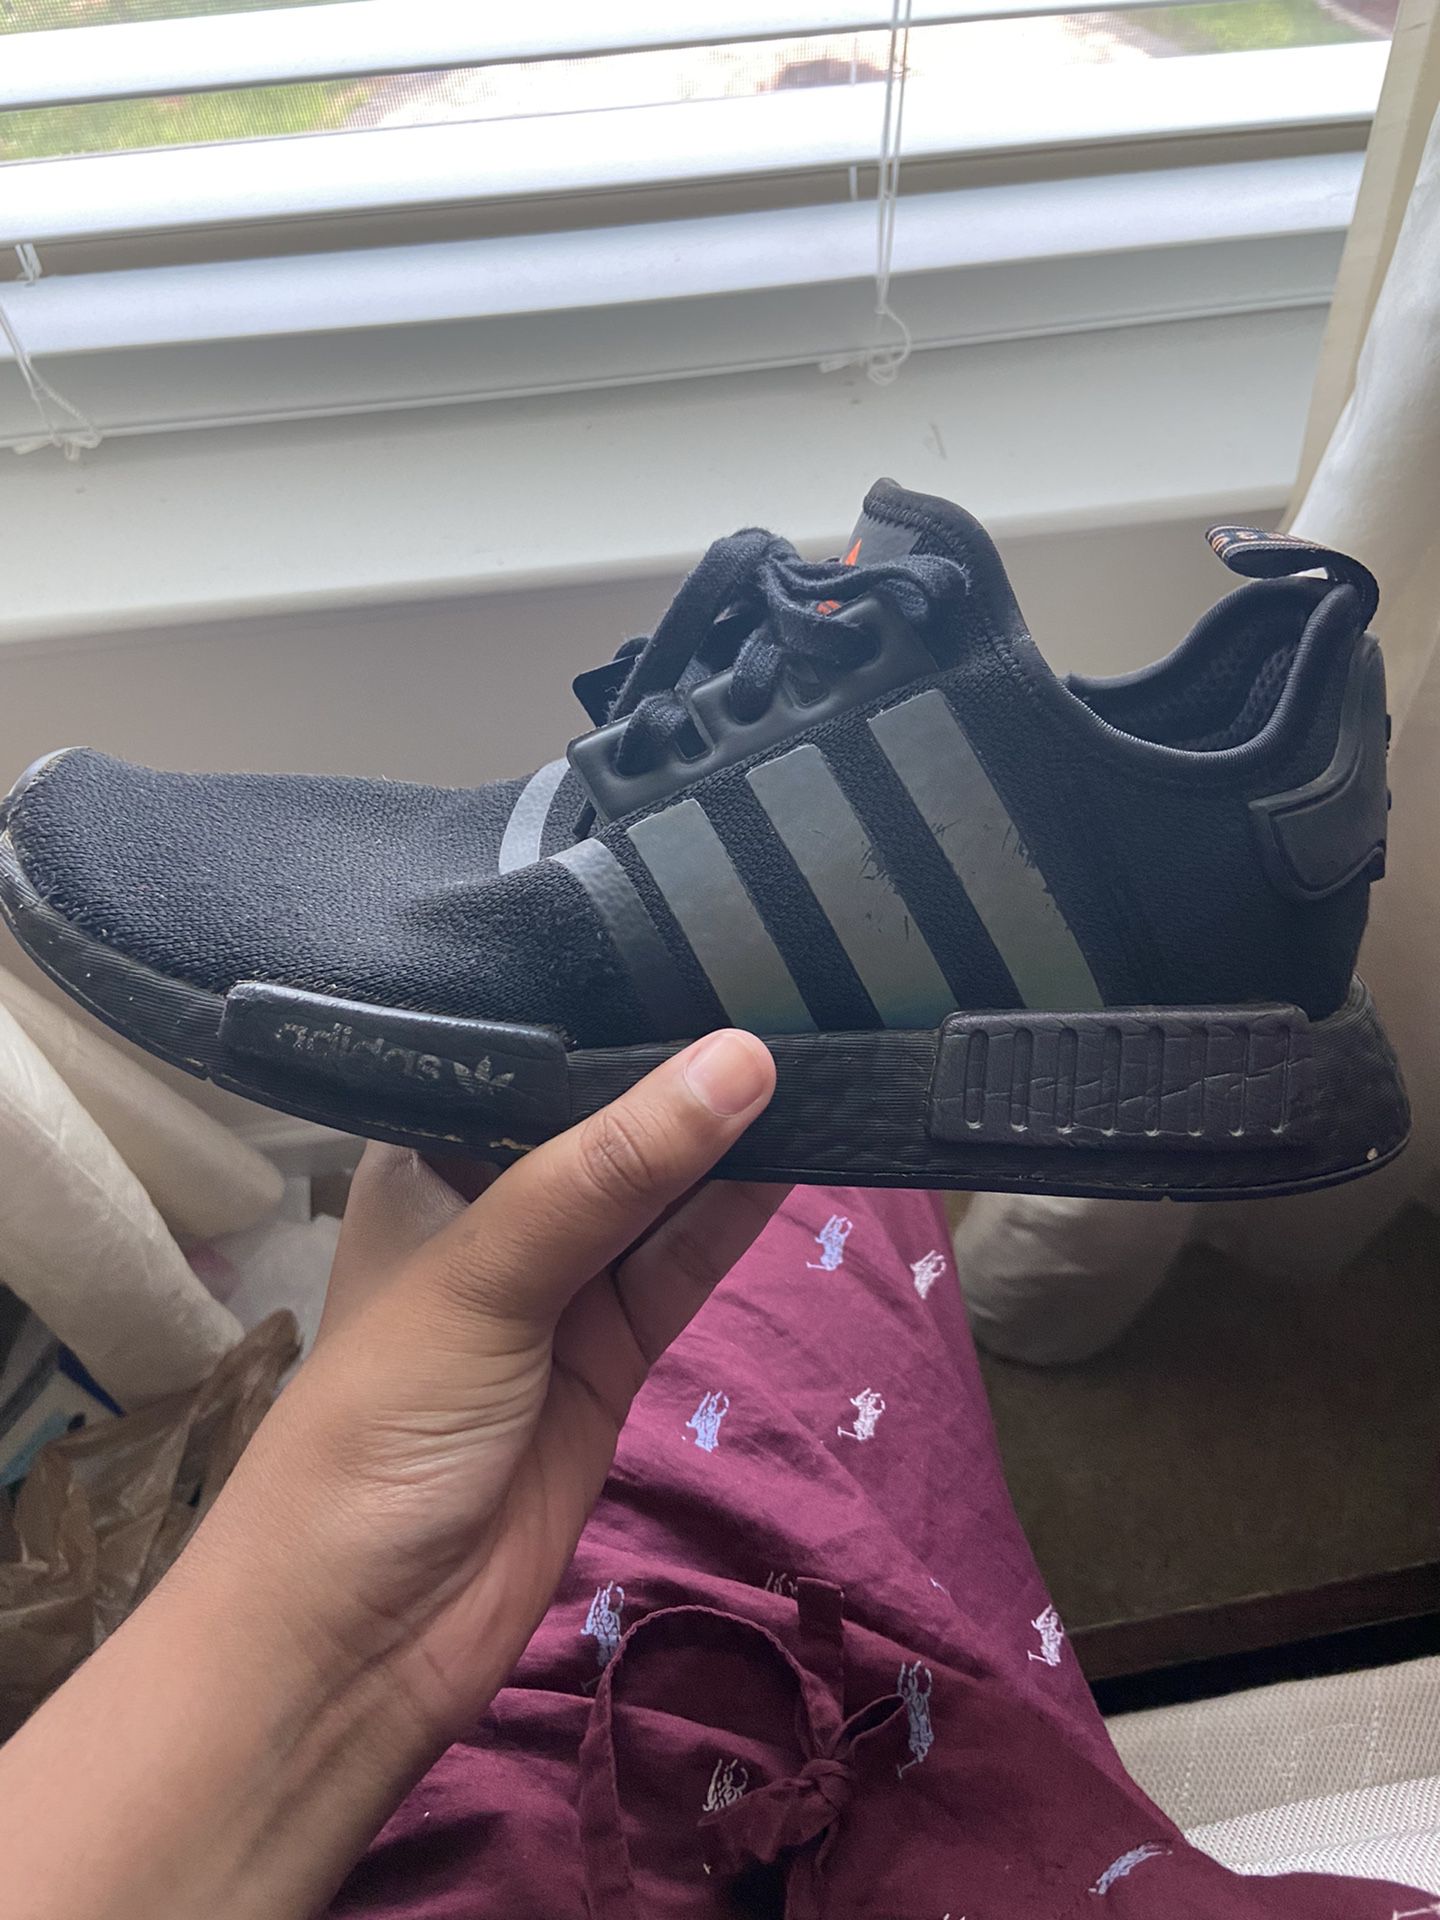 Bidrag enkelt bypass Adidas NMD r1 REFLECTIVE XENO Size 10 for Sale in Marvin, NC - OfferUp